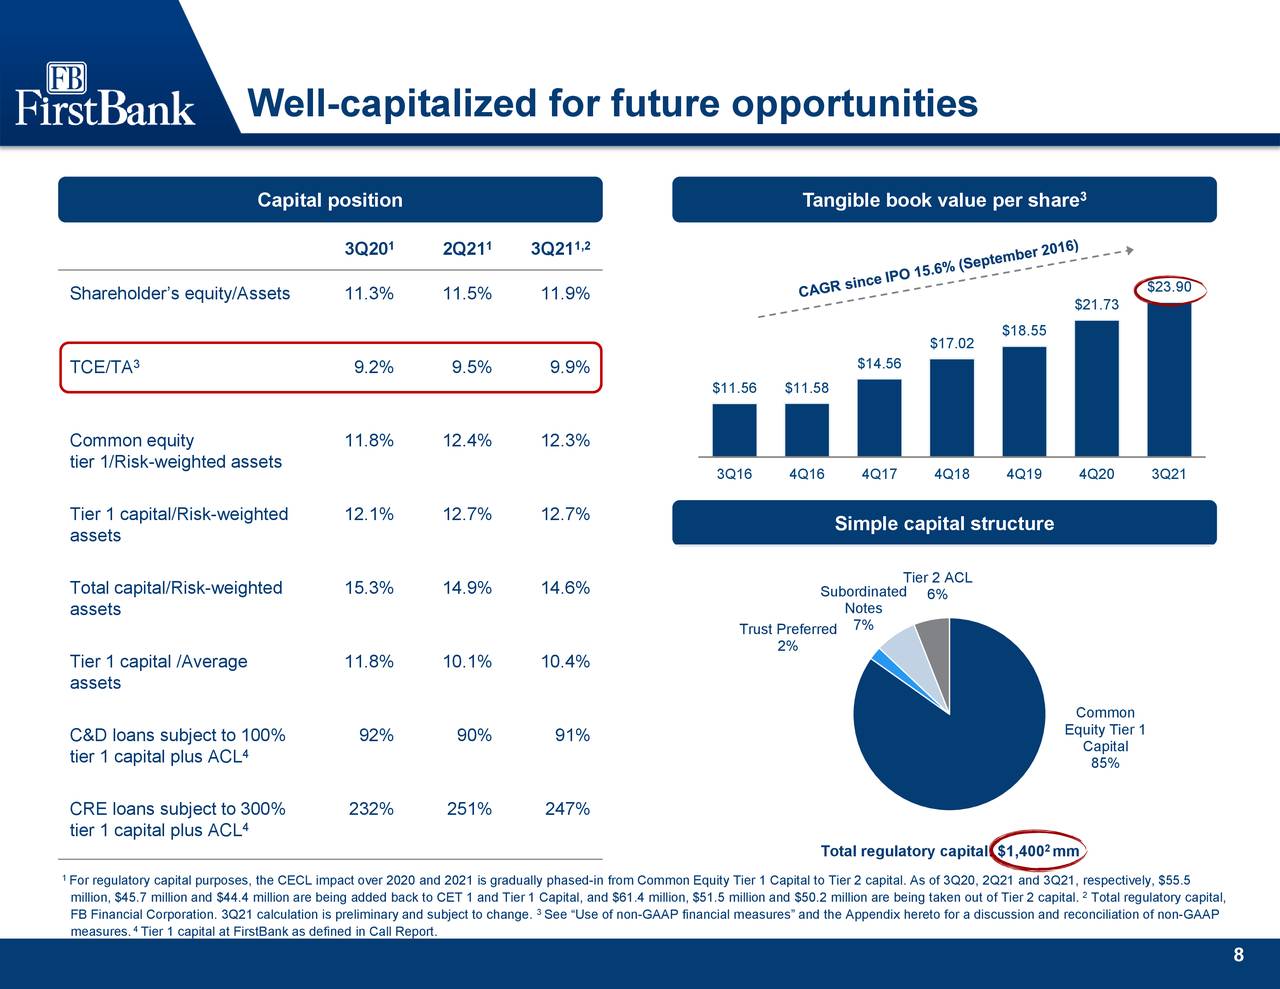 Well-capitalized for future opportunities